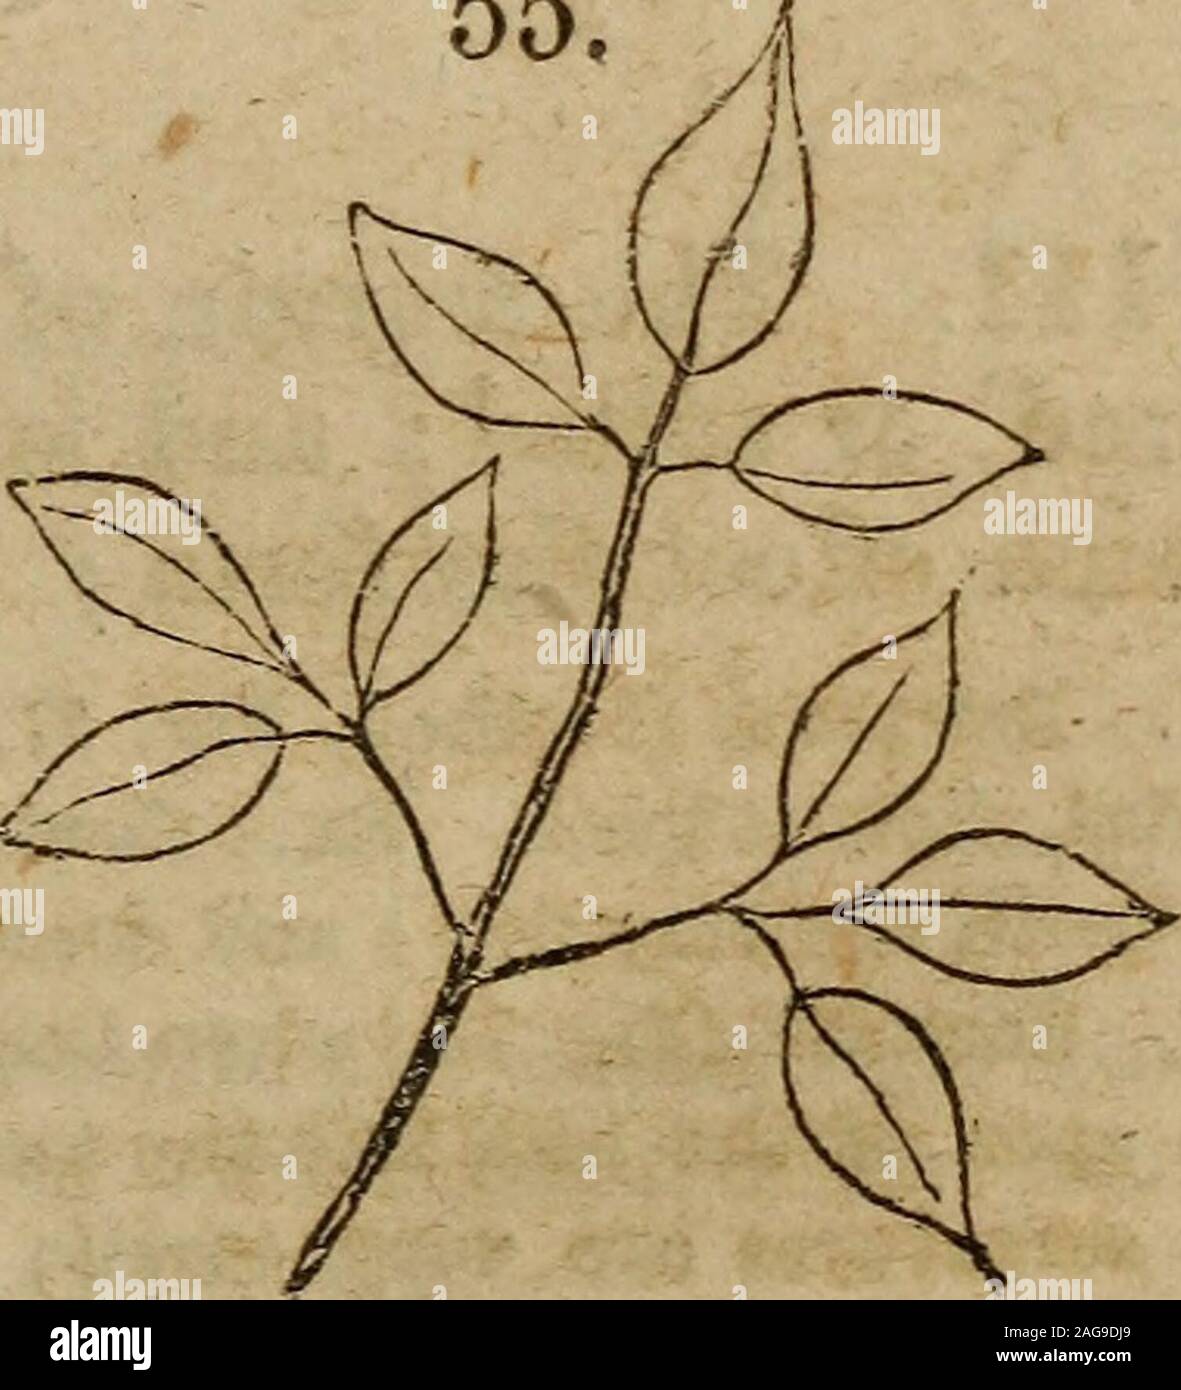 . The botanical class-book, and flora of Pennsylvania, designed for seminaries of learning and private classes. 40 MARGIN. = Radiate veined Compound leaves.110. When a radiate veined leaf becomes compound, theleaflets are necessarily all attached to the apex of the commonpetiole, forming a ternate or palmately trifoliate leaf, as inClover, (Fig. 54,) or a digitate leaf,* as in the Horse chestnut,(Fig. 44). 1. Biternate, (twice ternate, Fig. 55,) when the leafletsof a ternate leaf become themselves ternate. Ex.: Squirrelcorn (Dicentra Canadensis.) 2. Tritehnate, (three times three ternate, Fig. Stock Photo